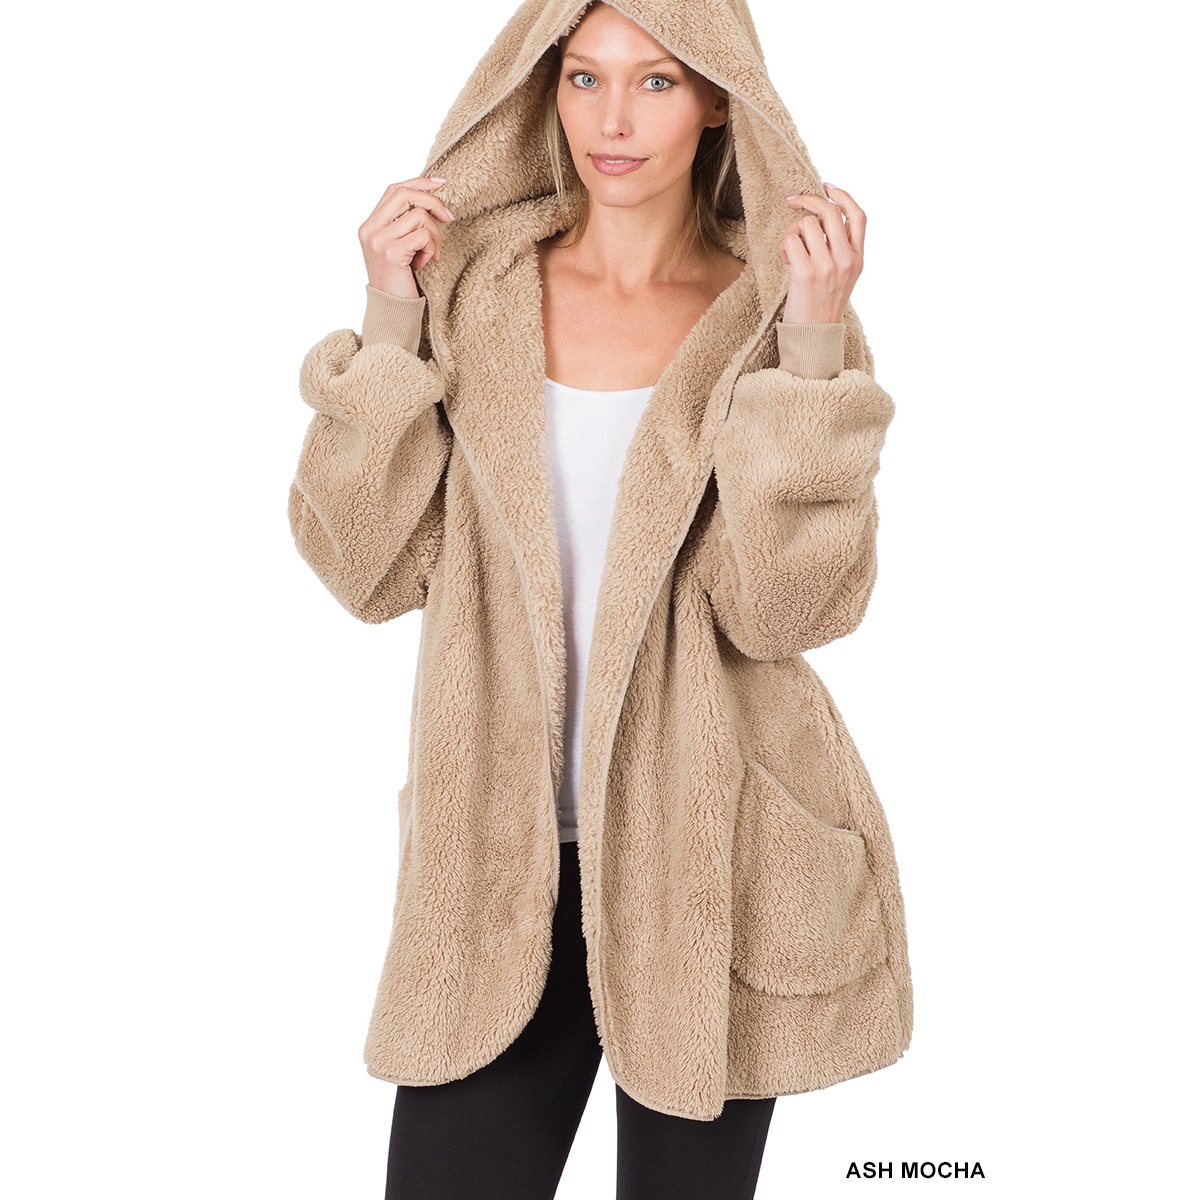 Hooded Faux Fur Teddy Jacket with Pockets